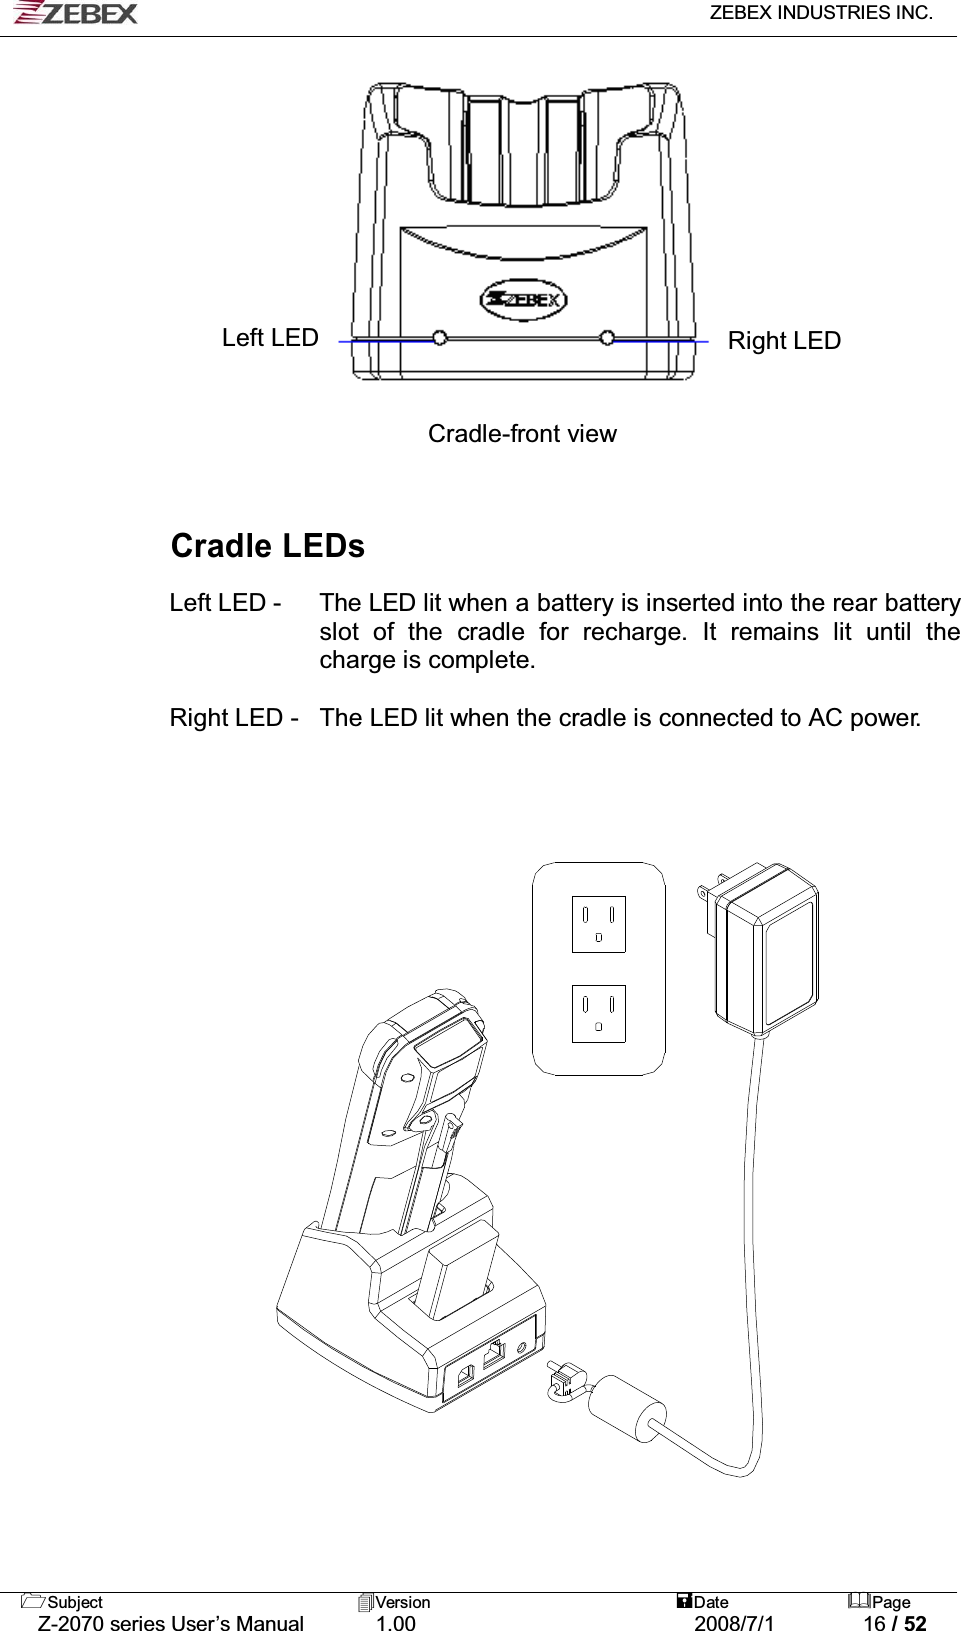   ZEBEX INDUSTRIES INC.   Subject Version  Date Page   Z-2070 series User’s Manual  1.00  2008/7/1  16 / 52                 Cradle LEDs  Left LED -    The LED lit when a battery is inserted into the rear battery slot of the cradle for recharge. It remains lit until the charge is complete.  Right LED -   The LED lit when the cradle is connected to AC power.                            Right LED Left LED Cradle-front view 